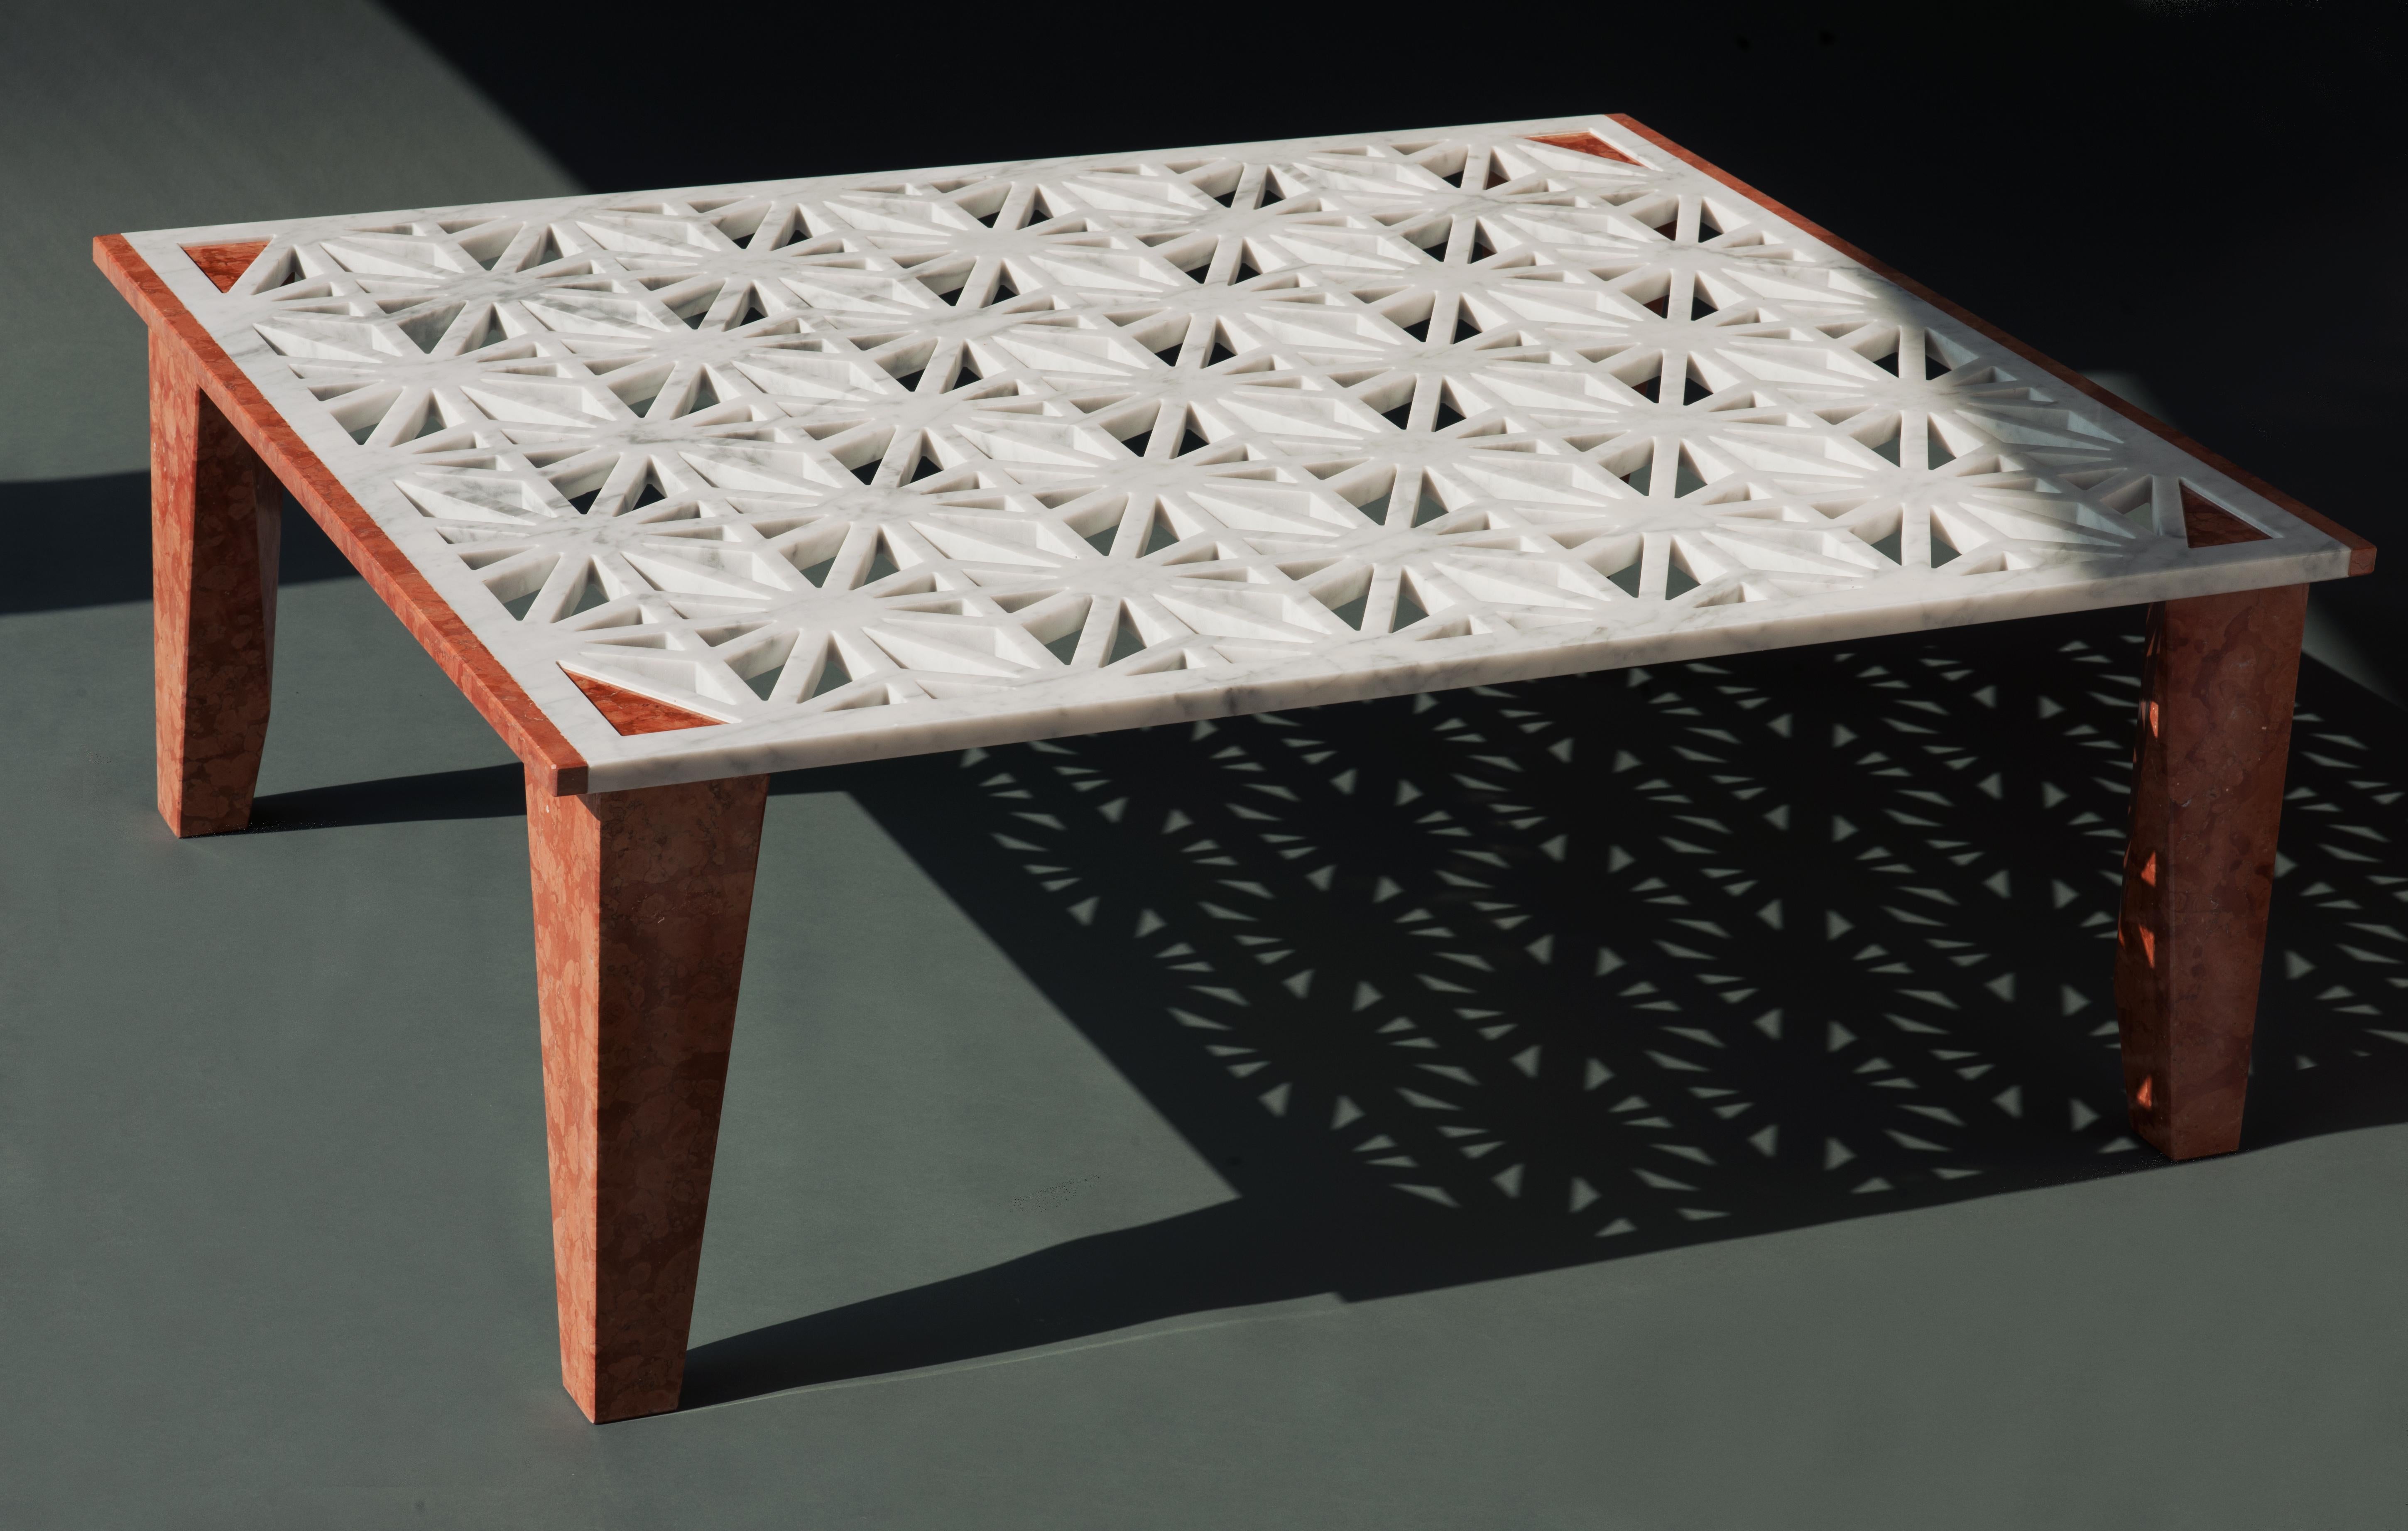 Made in collaboration with the architect Stefano Calchi Novati, Lace is a coffee table made entirely of marble. 

The table top is the undisputed protagonist of this elegant and exclusive home design object. The inlaid decoration of the table top,